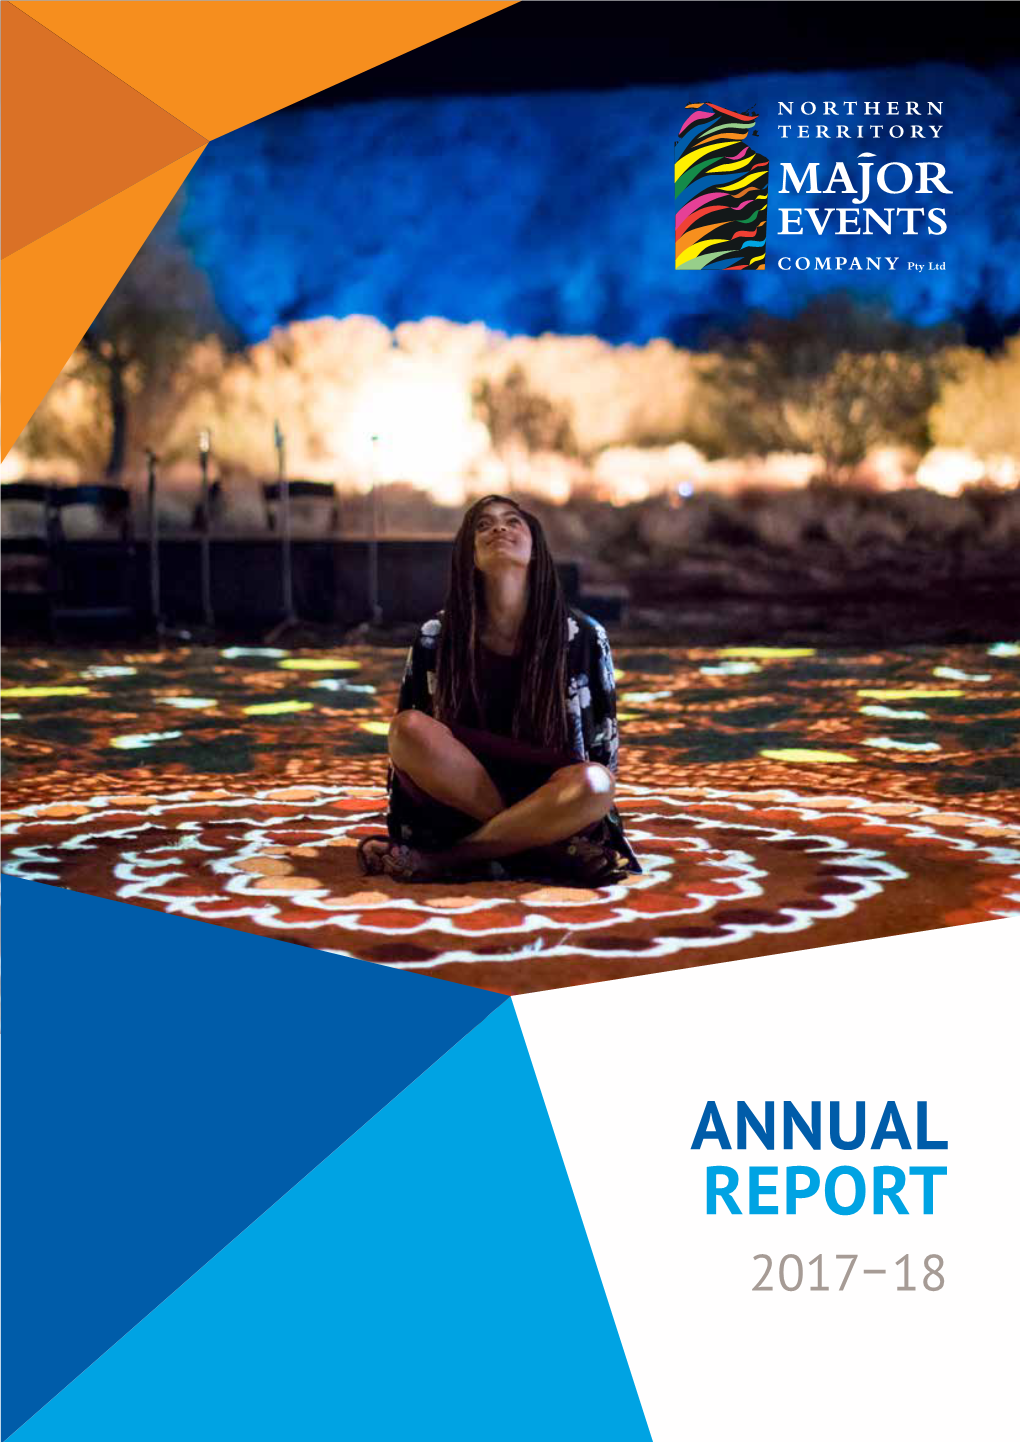 ANNUAL REPORT 2017–18 Ii NORTHERN TERRITORY MAJOR EVENTS COMPANY ANNUAL REPORT 2017-18 1